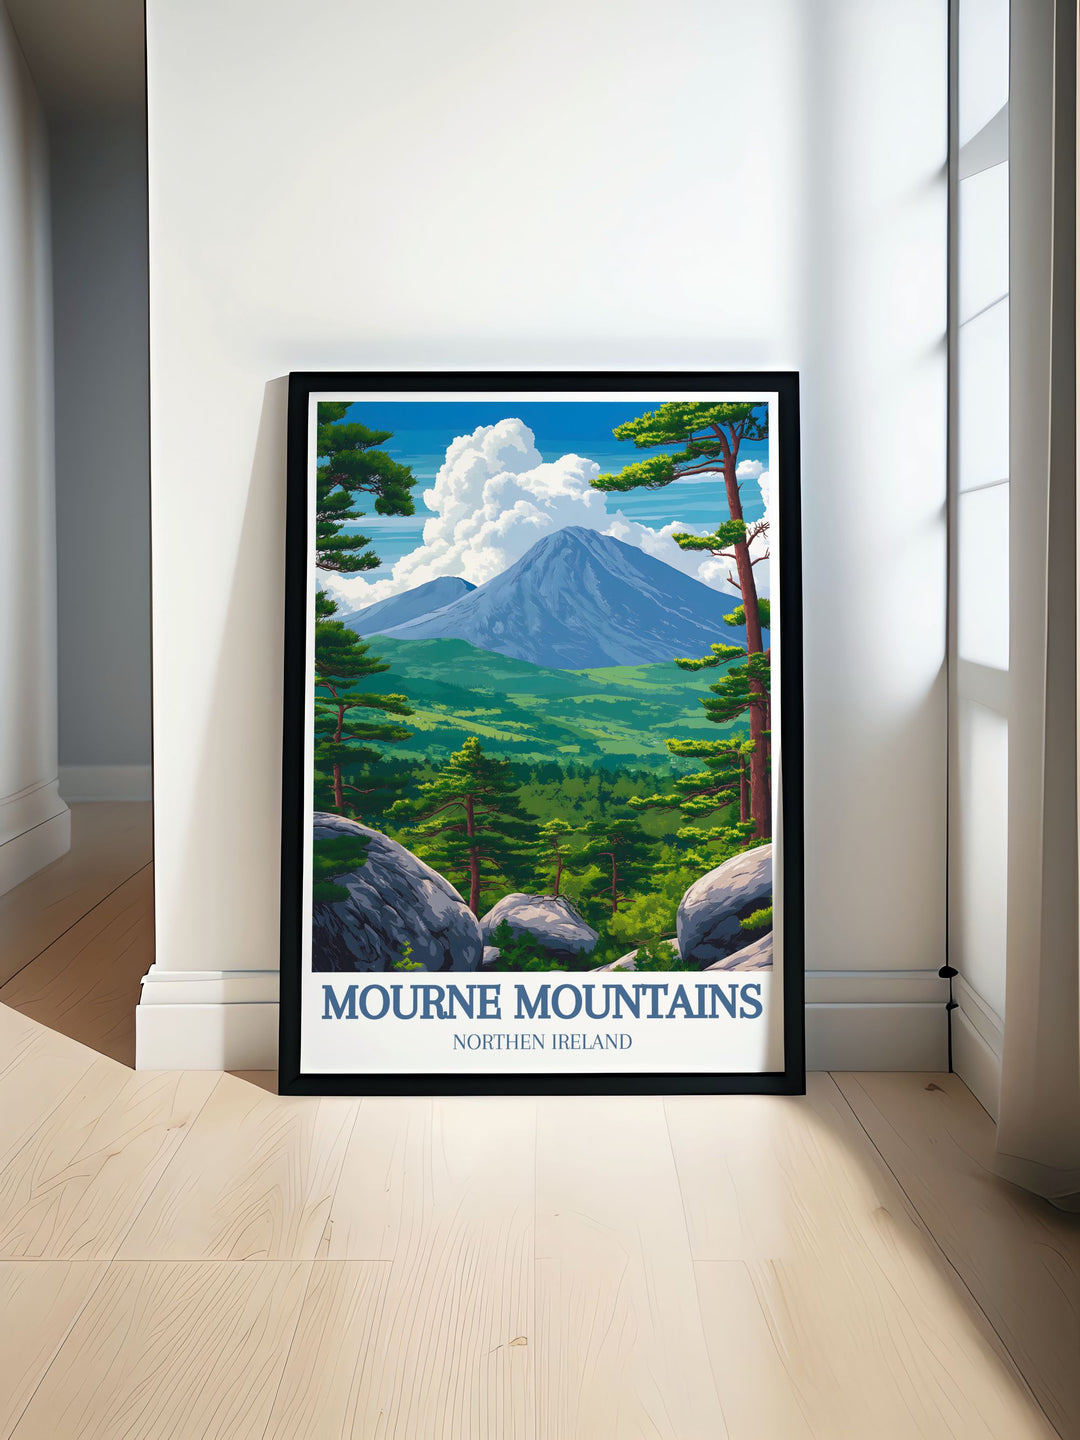 Highlighting the hidden valleys and scenic trails of the Mourne Mountains, this poster features lush greenery and serene landscapes, ideal for nature enthusiasts and hikers.